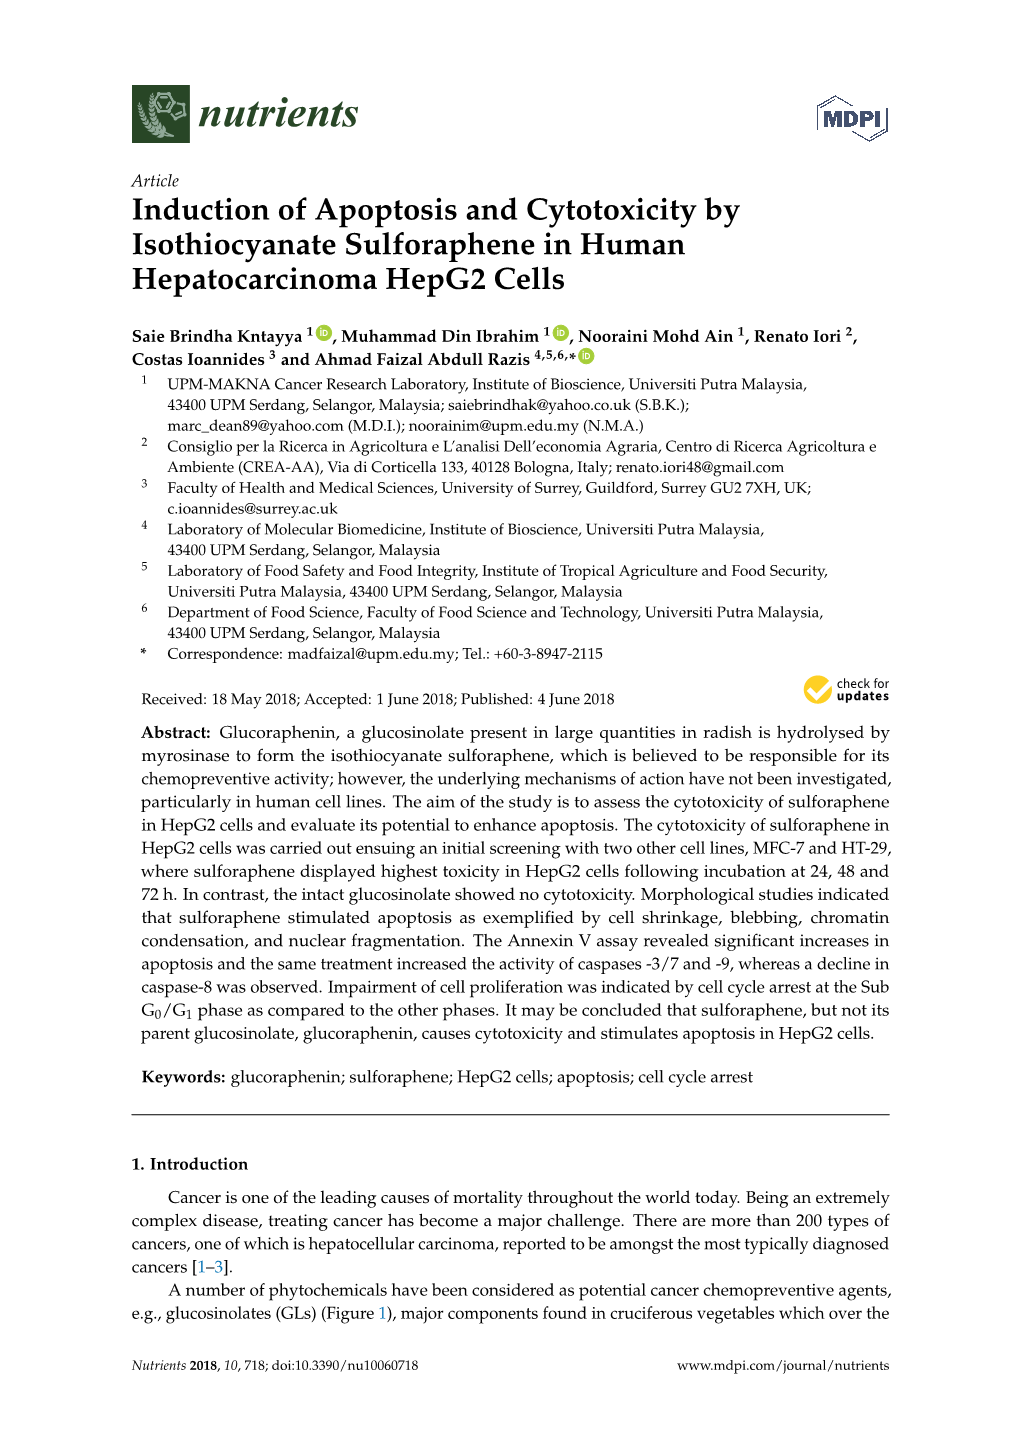 Induction of Apoptosis and Cytotoxicity by Isothiocyanate Sulforaphene in Human Hepatocarcinoma Hepg2 Cells